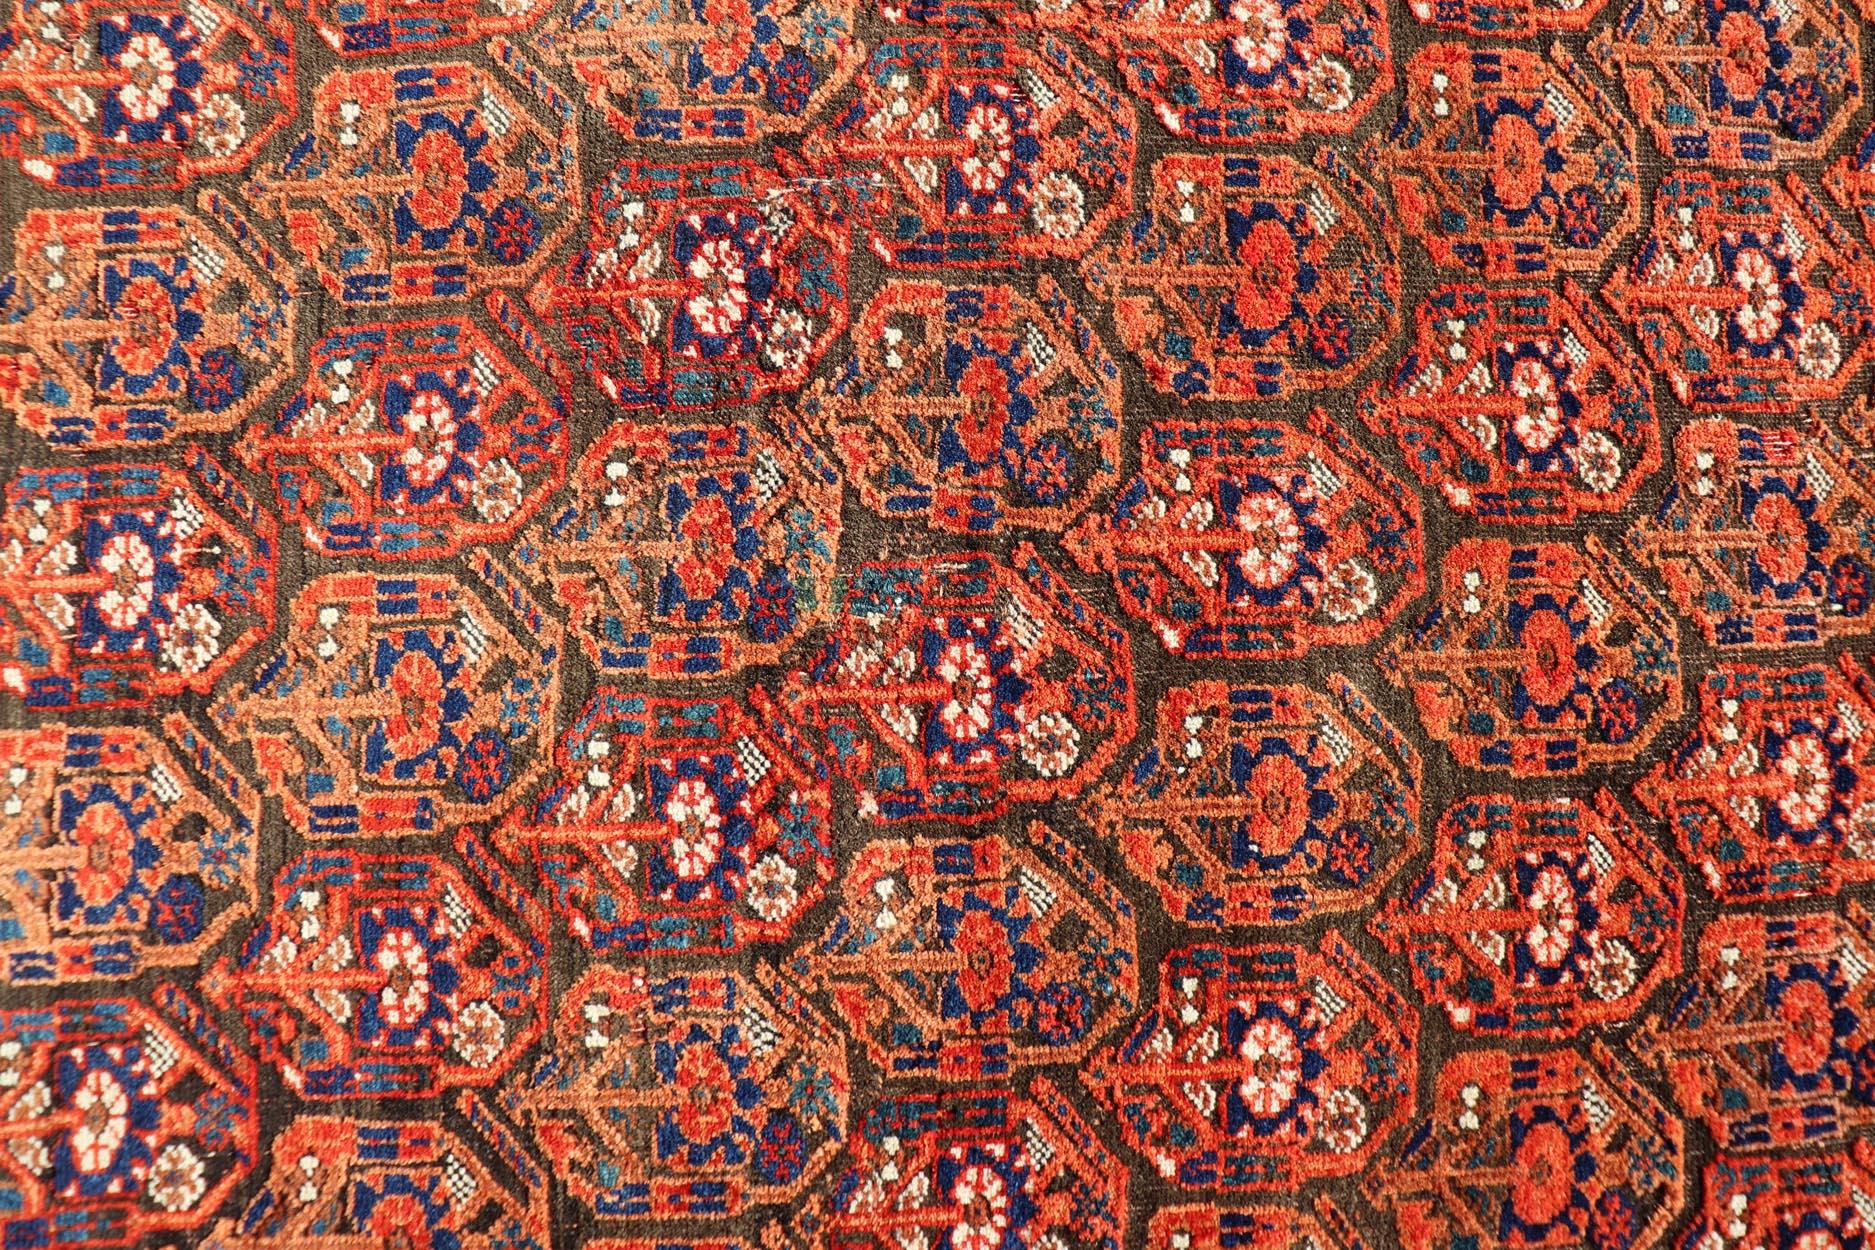 Tribal  Fine Persian Antique Afshar Rug in Orange and Copper Background & Multi Colors For Sale